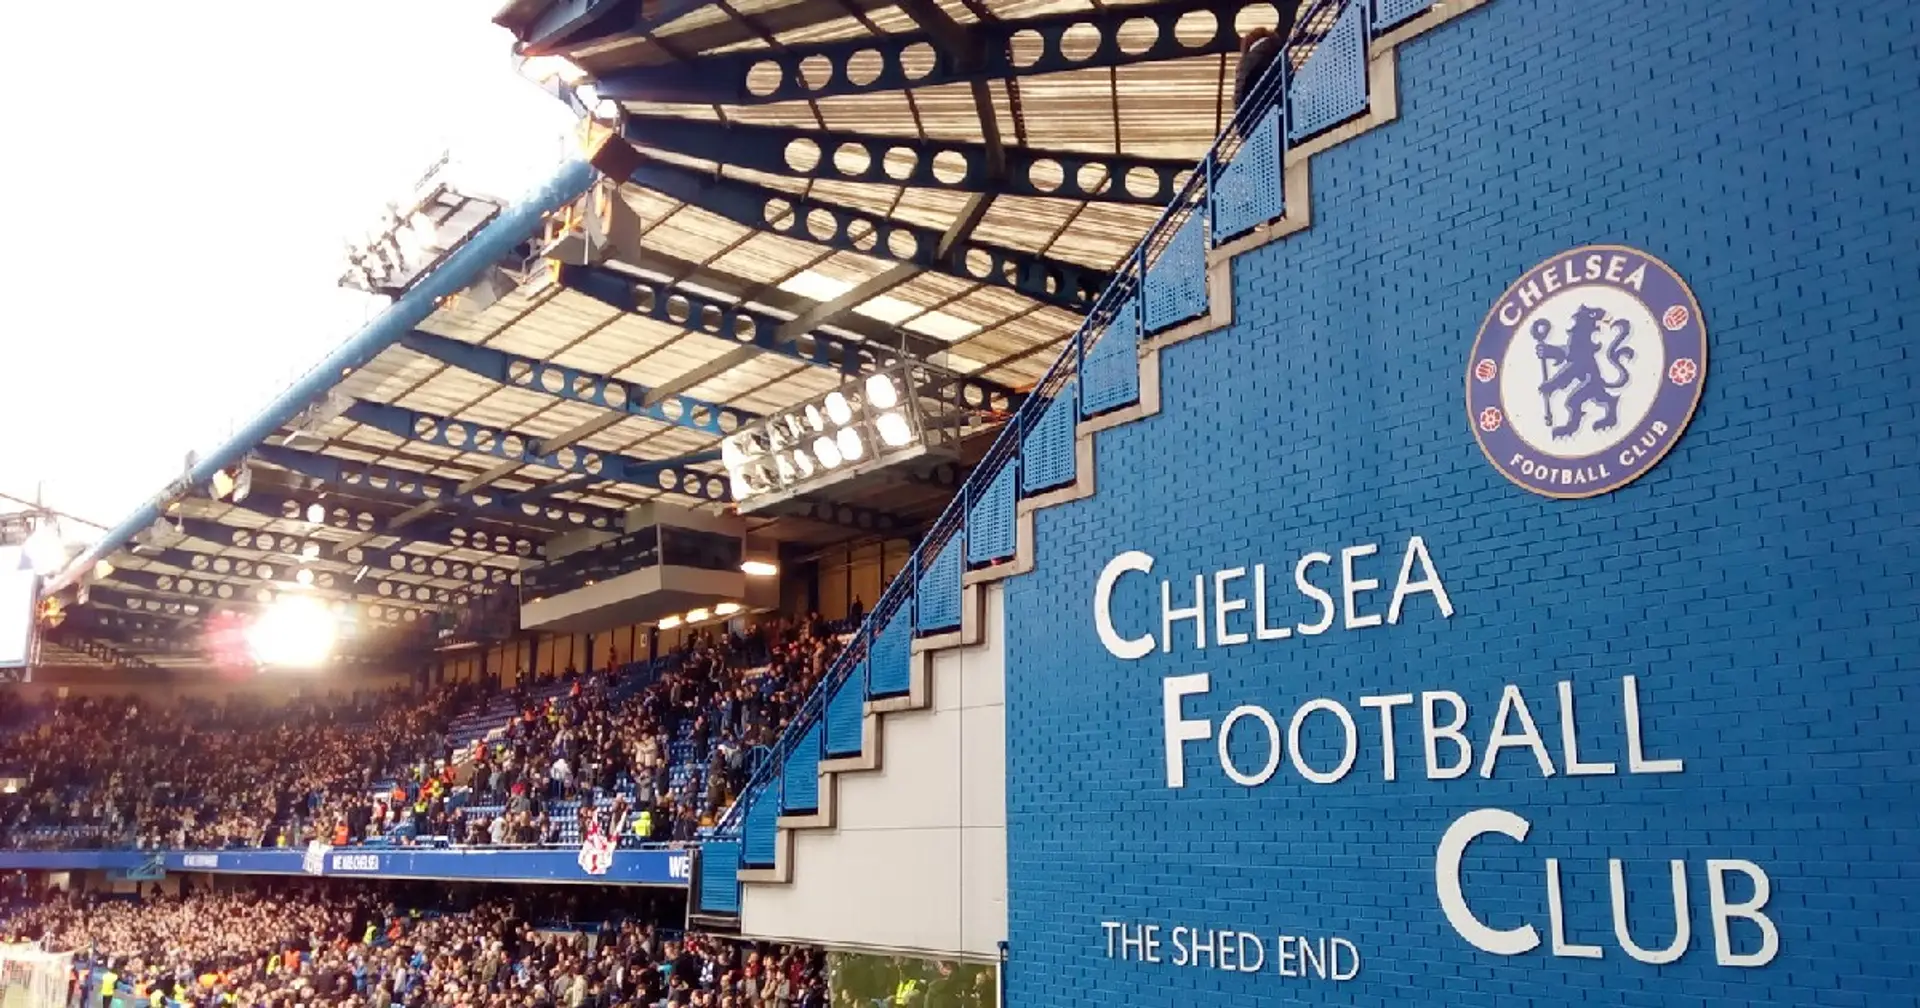 Stamford Bridge redevelopment impossible until 2027 — Chelsea's other options named